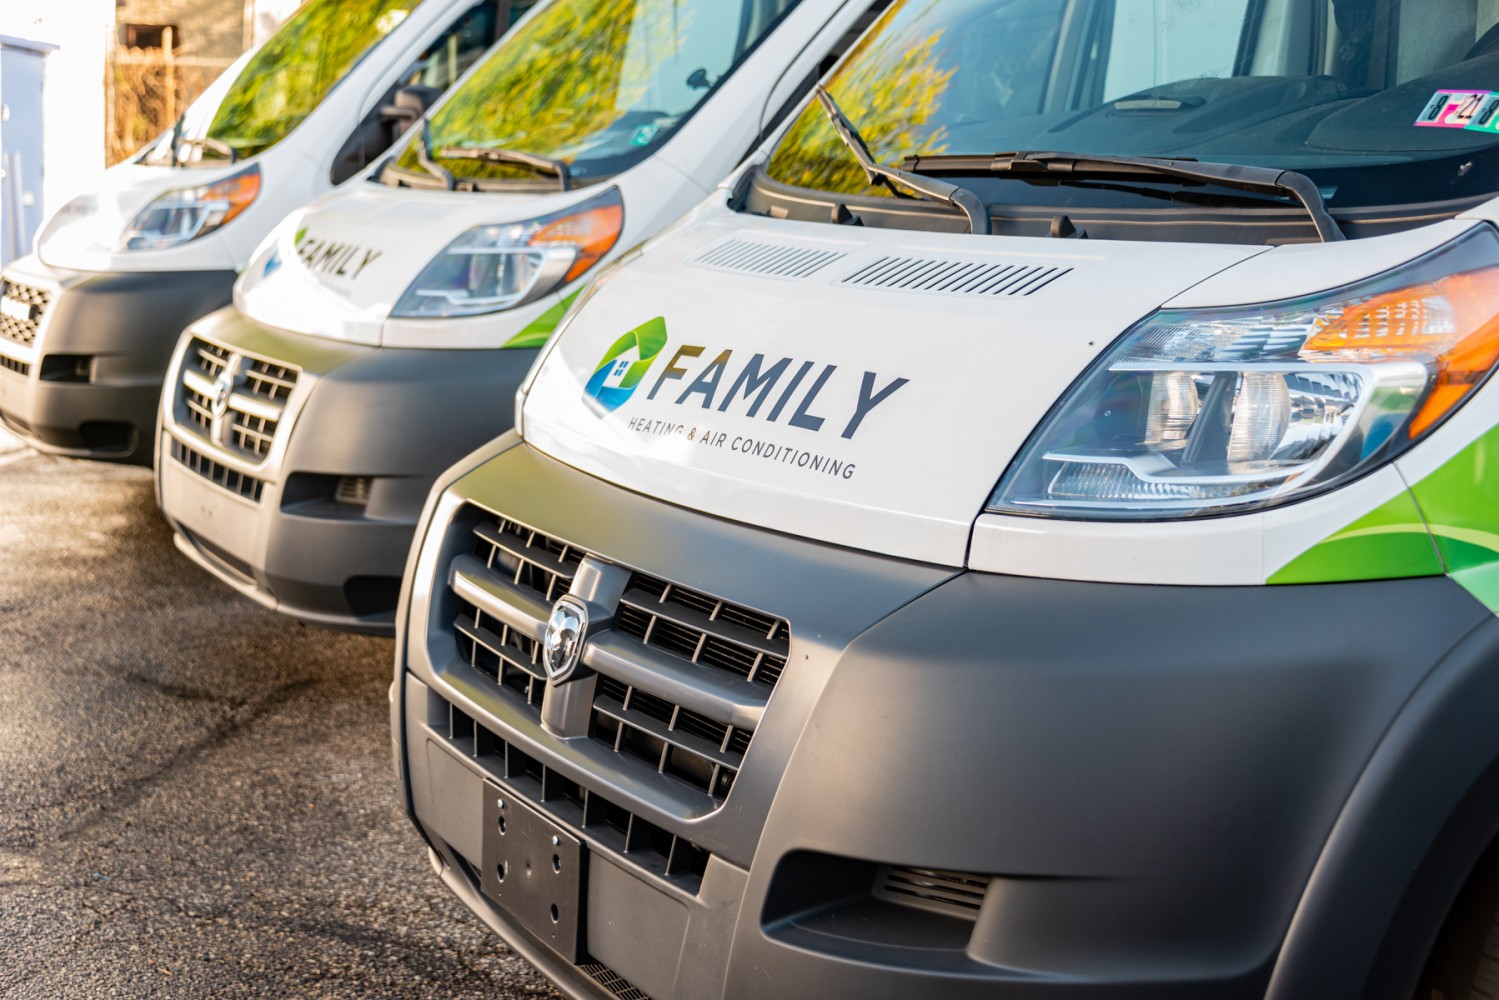 Family Heating & Air Conditioning